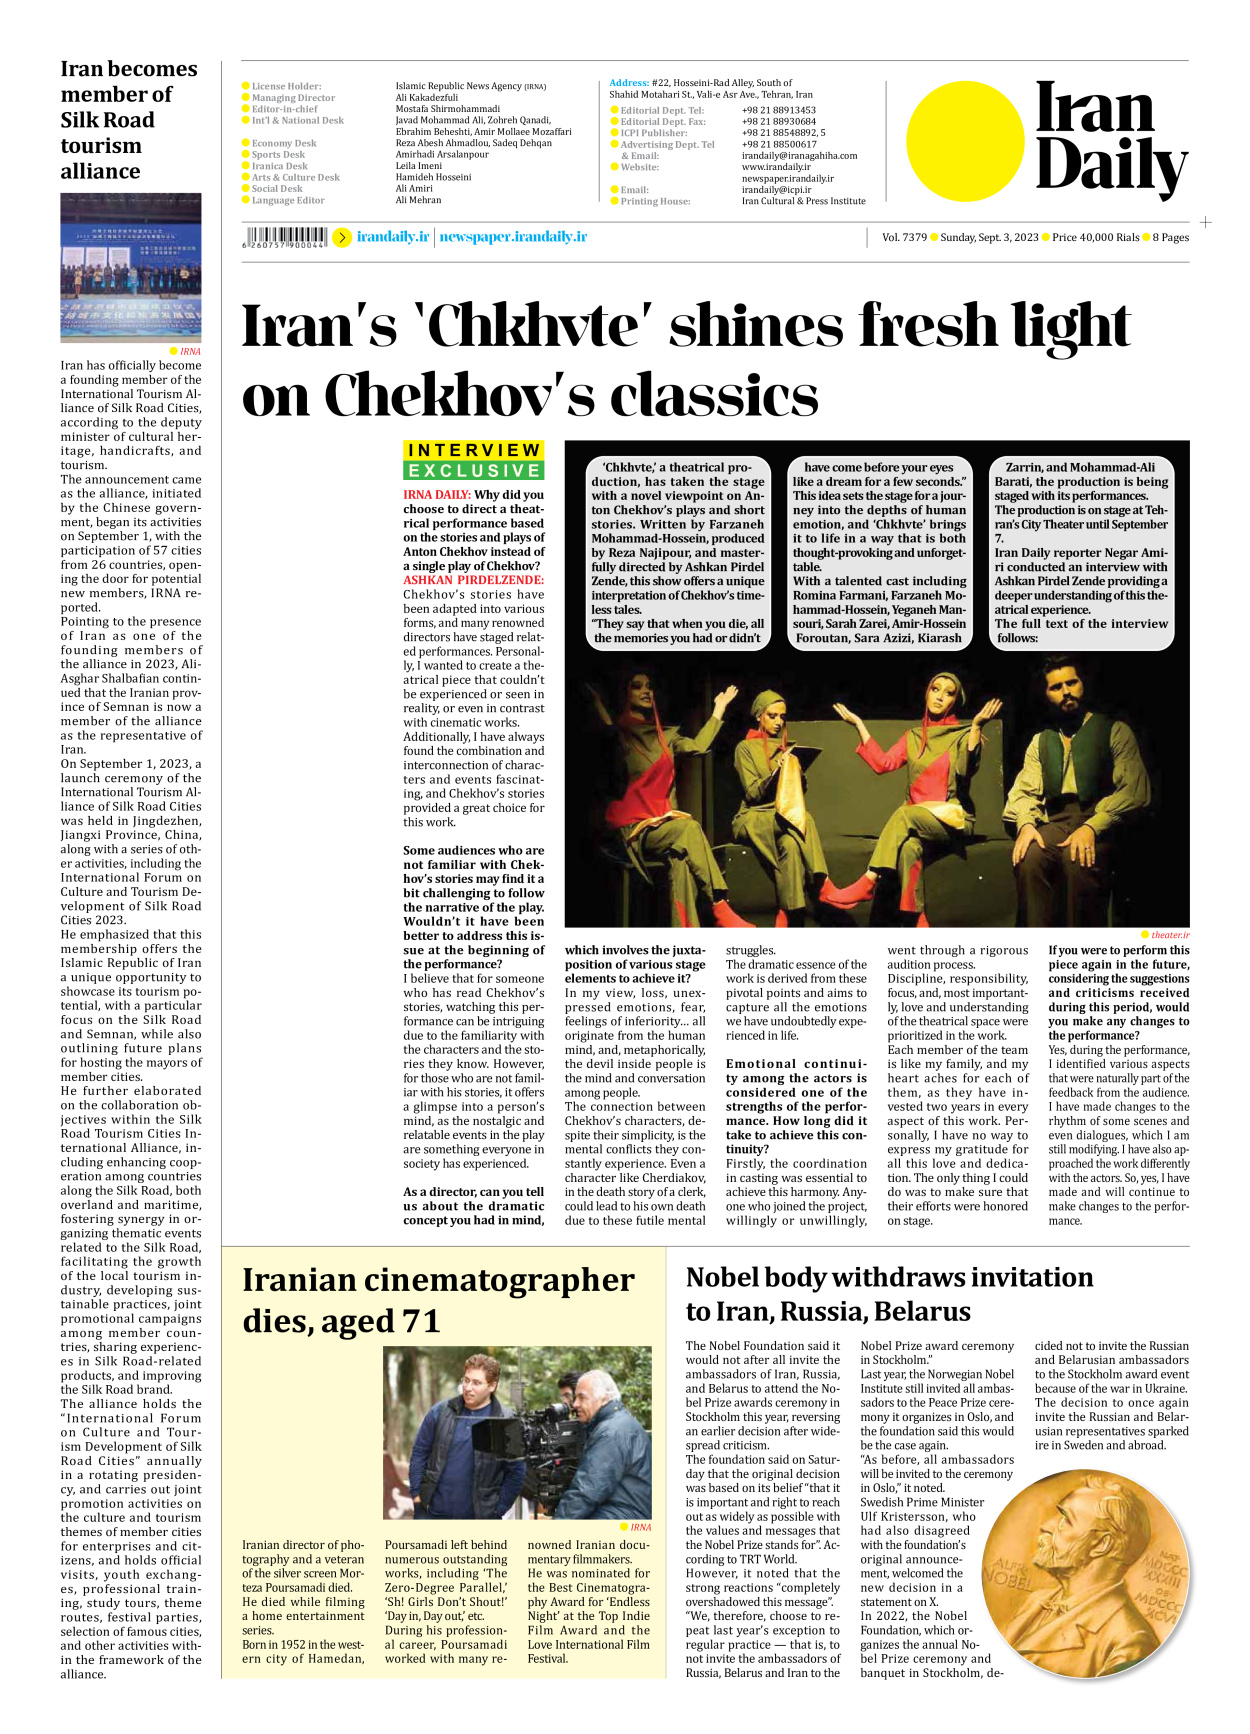 Iran Daily - Number Seven Thousand Three Hundred and Seventy Nine - 03 September 2023 - Page 8